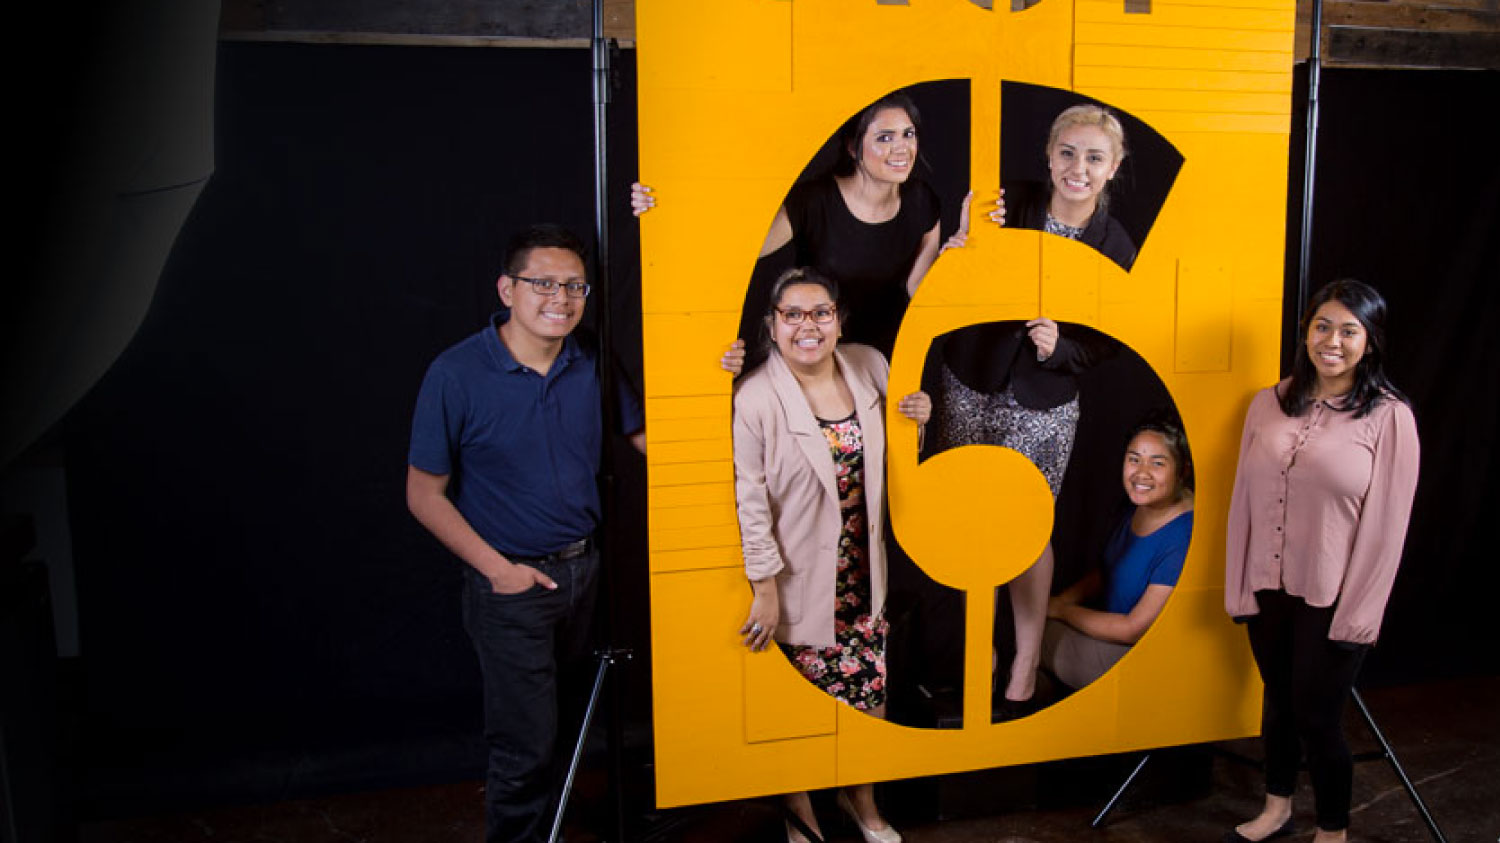 Act Six scholars posing behind a cutout of the number 6